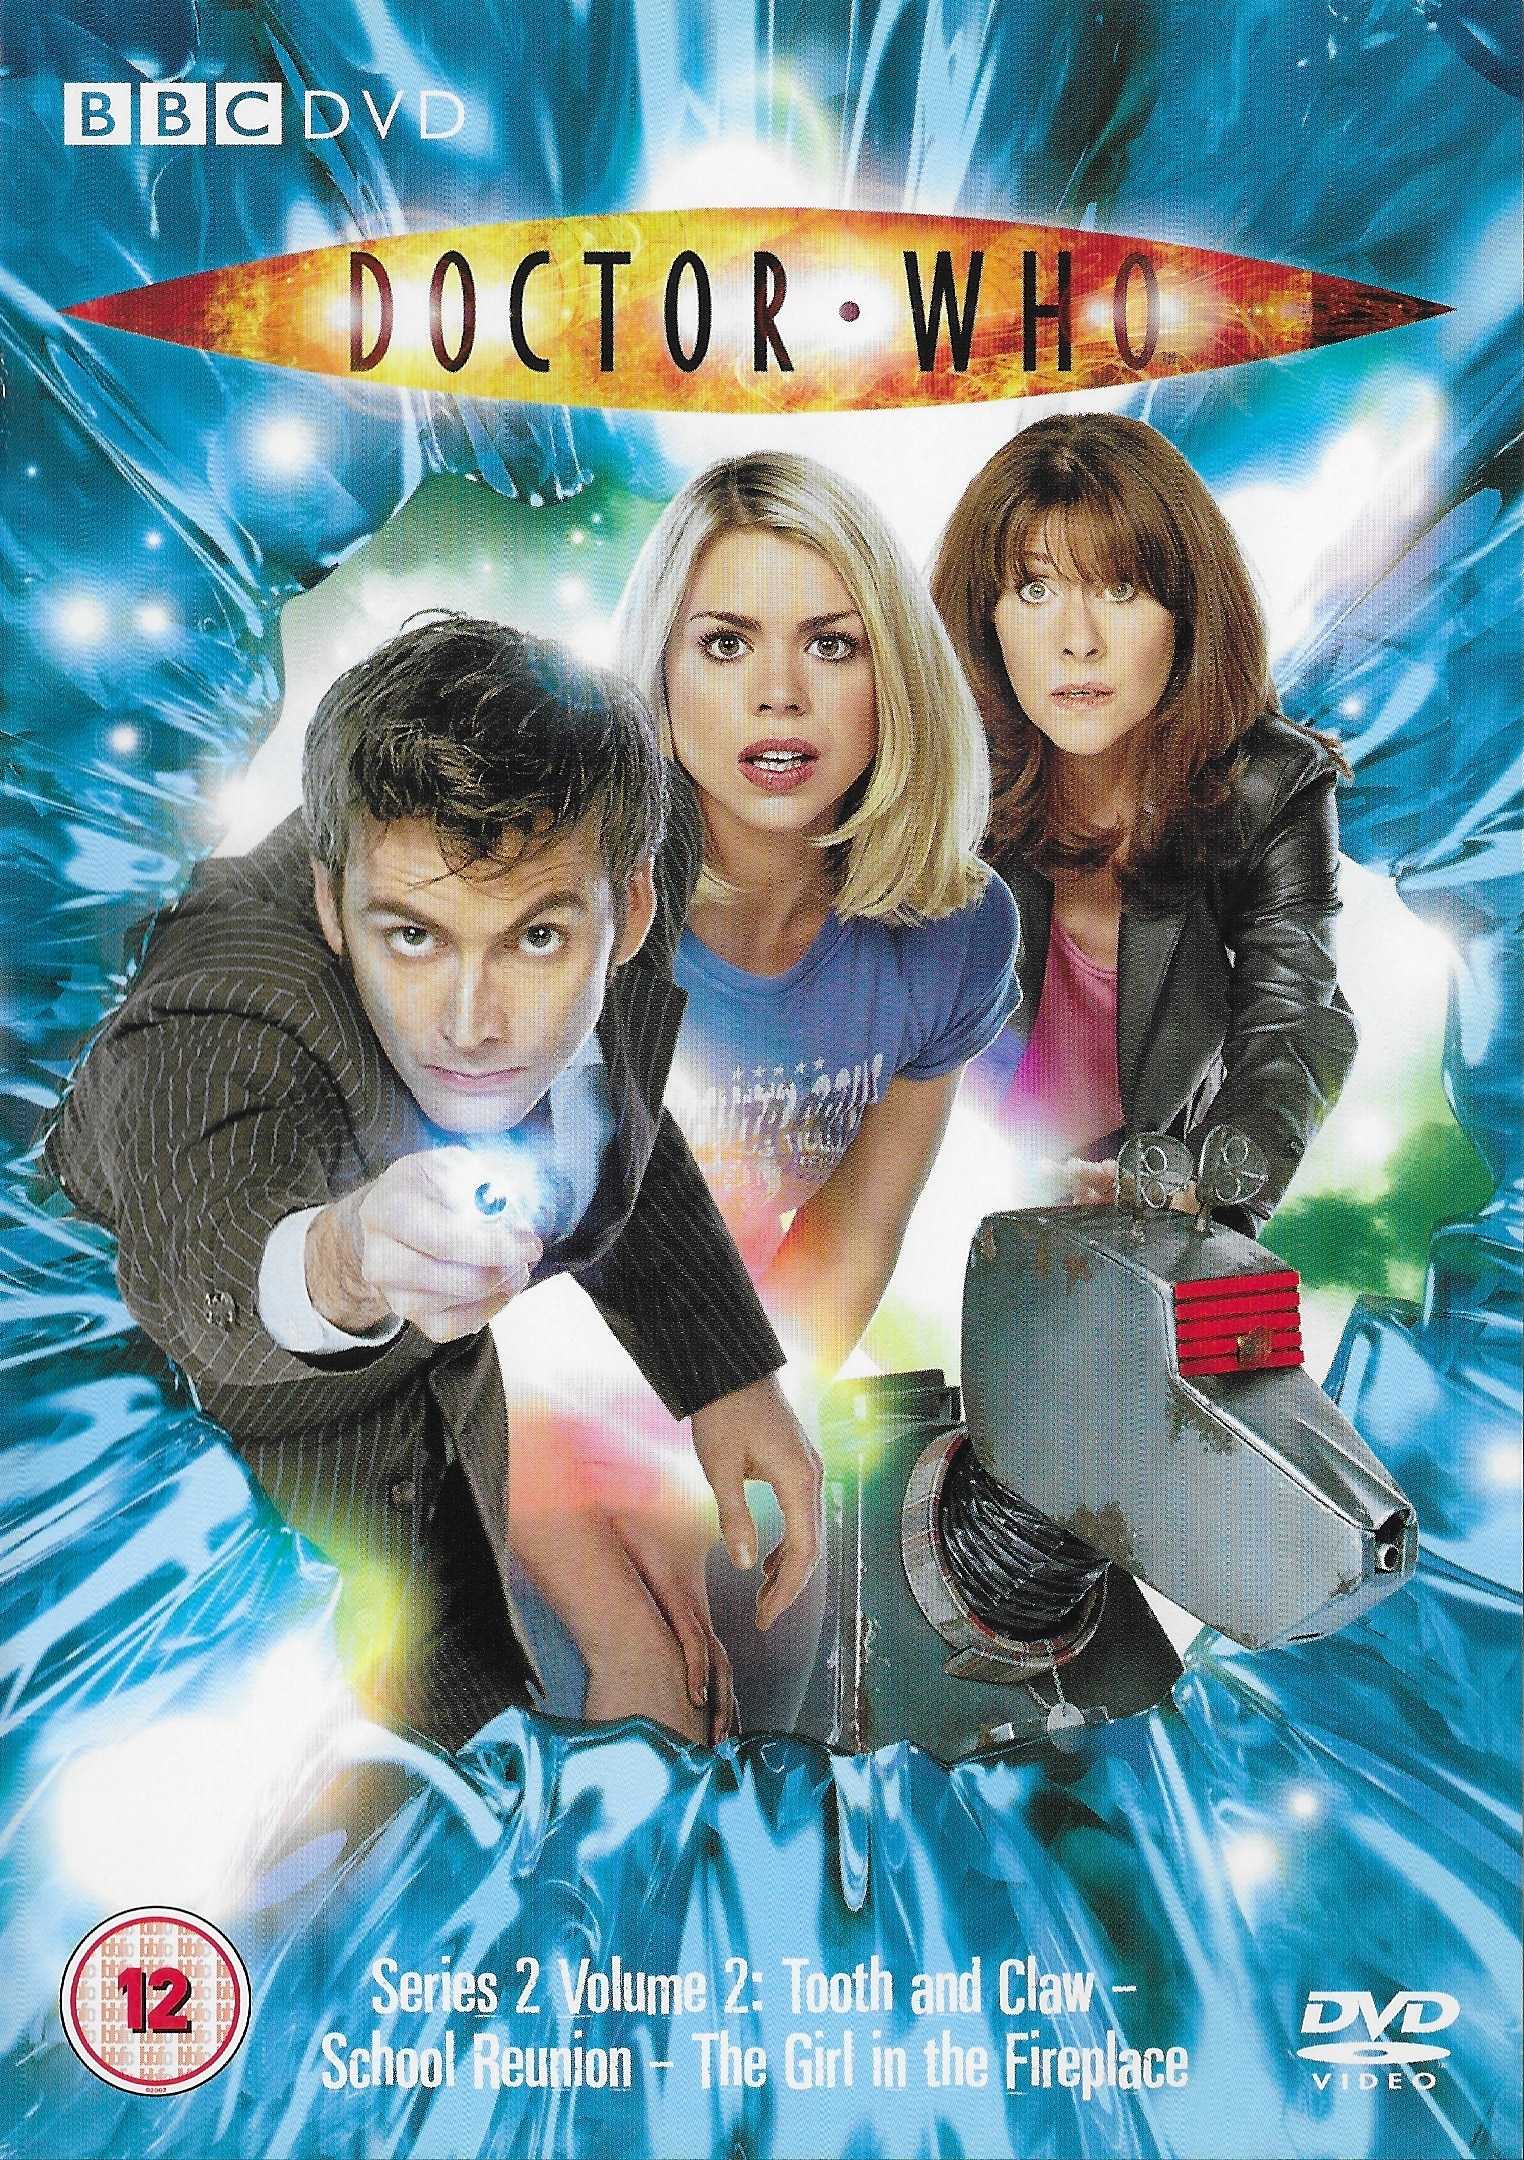 Picture of BBCDVD 1961 Doctor Who - Series 2, volume 2 by artist Russell T Davies / Toby Whithouse / Steven Moffat from the BBC dvds - Records and Tapes library